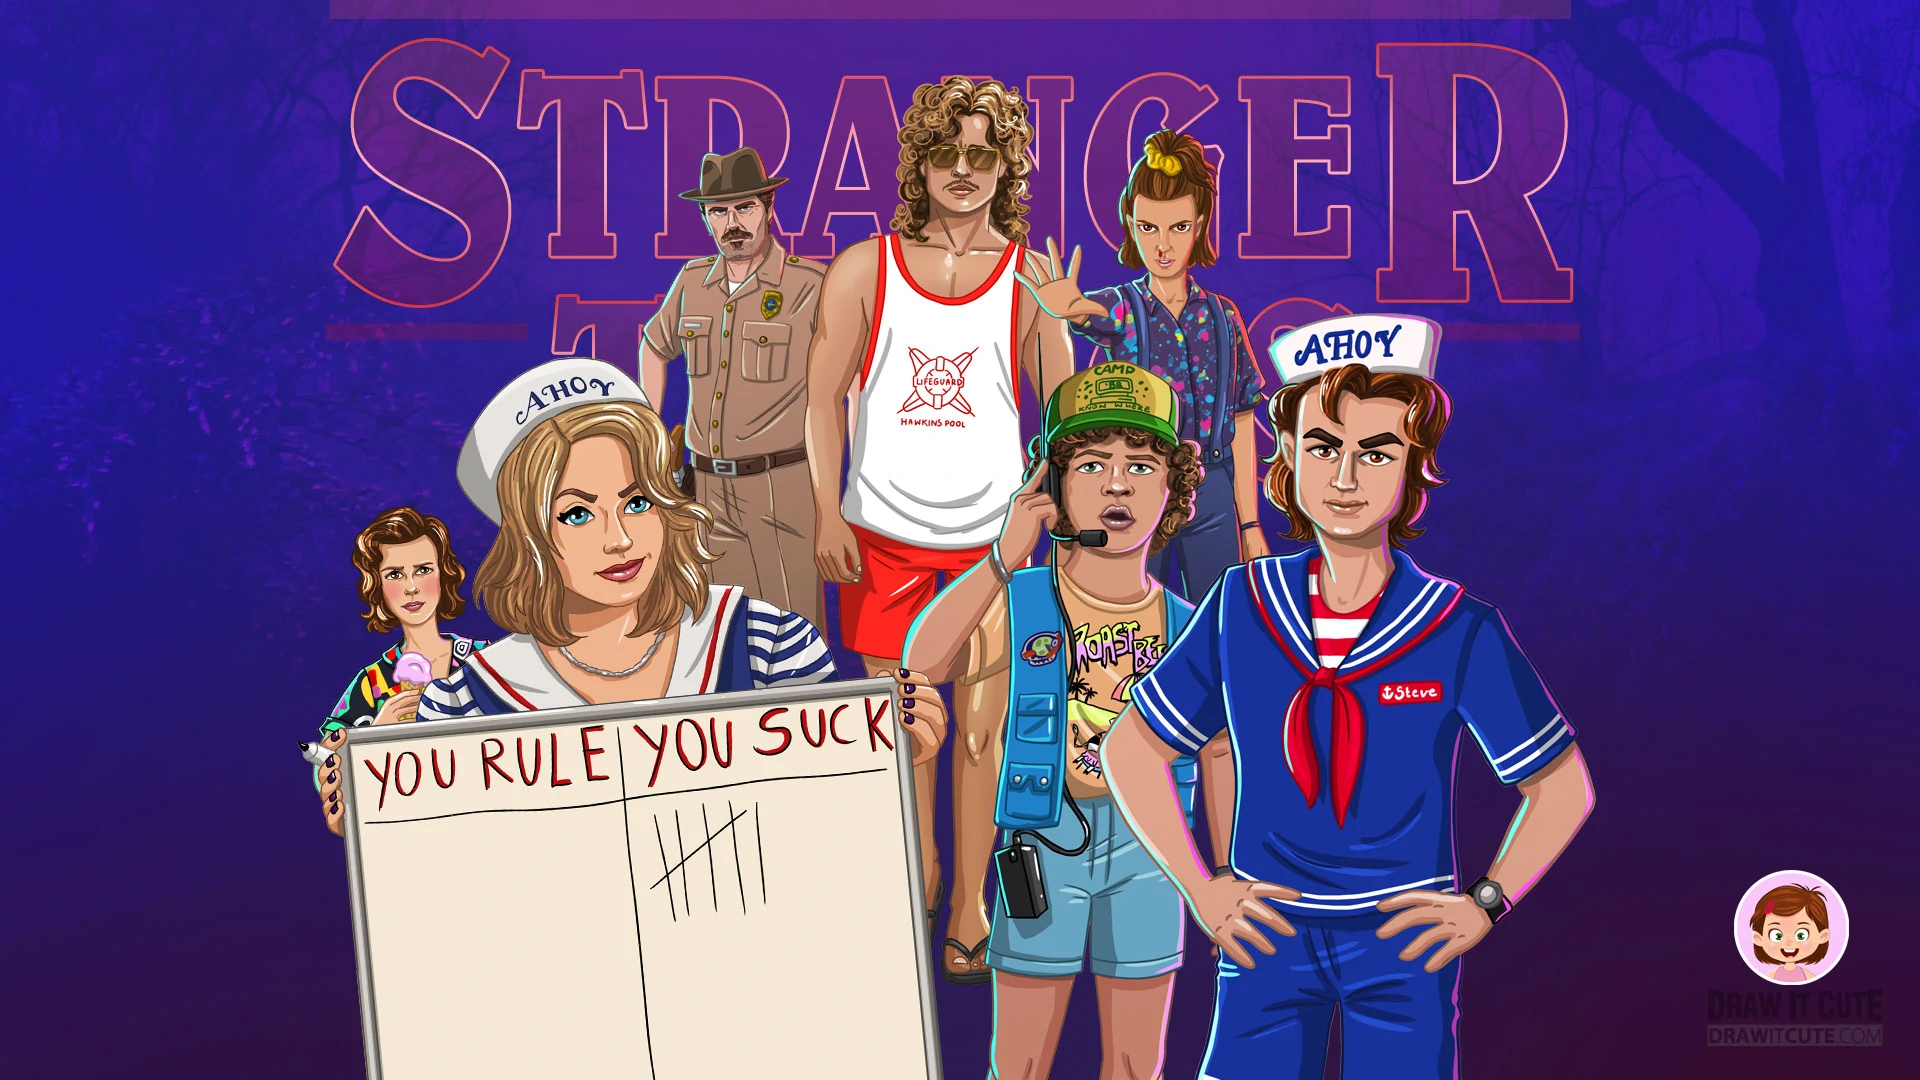 Stranger Things characters in a 1980s style illustration - Stranger Things